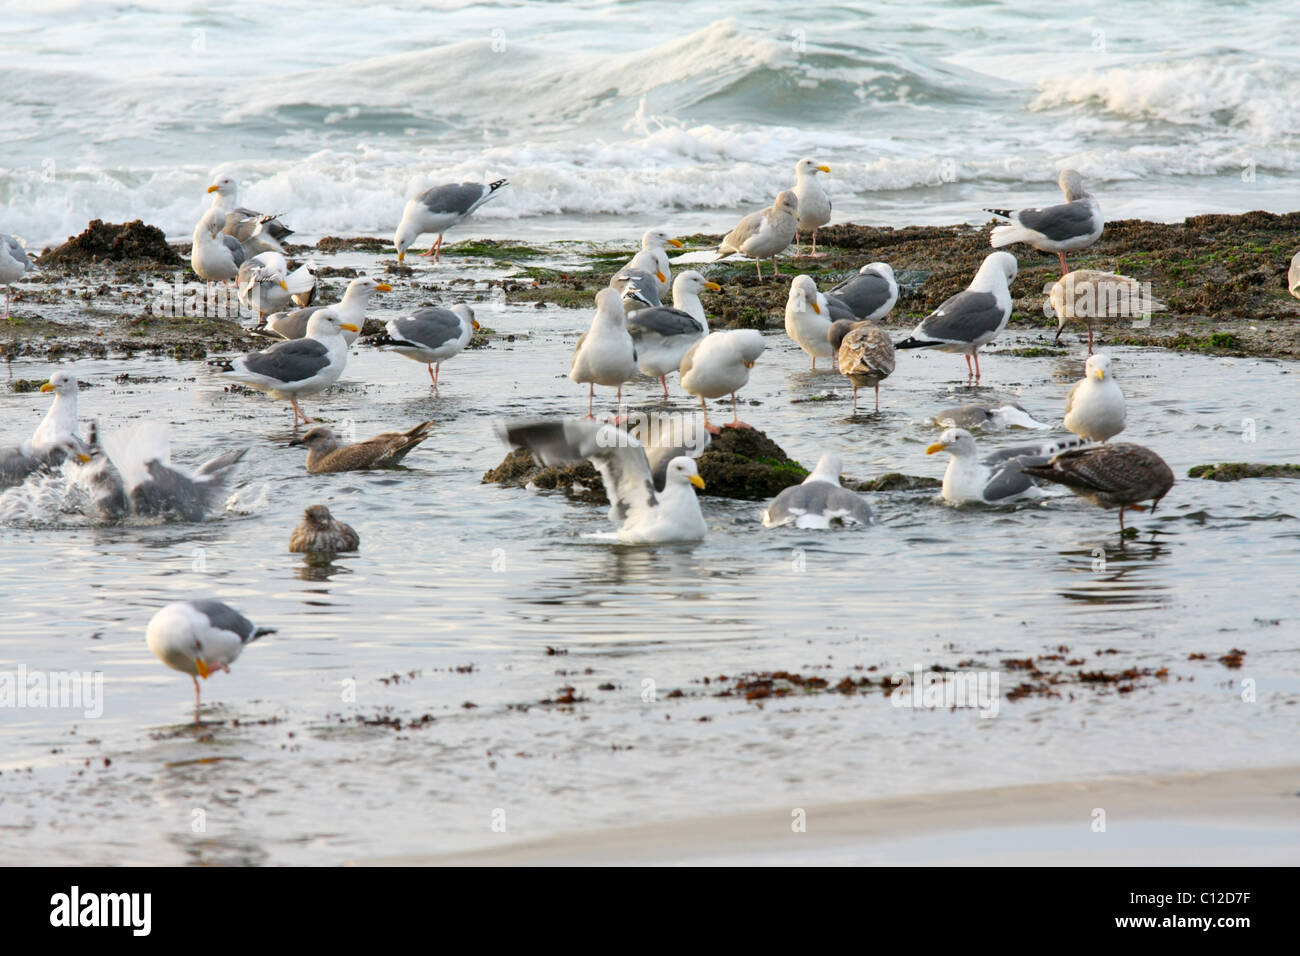 40,150.05656a Seagulls, birds, gulls, fluffing, twisting, bathing and splashing on the ocean beach in the water where freshwater creek enters ocean Stock Photo